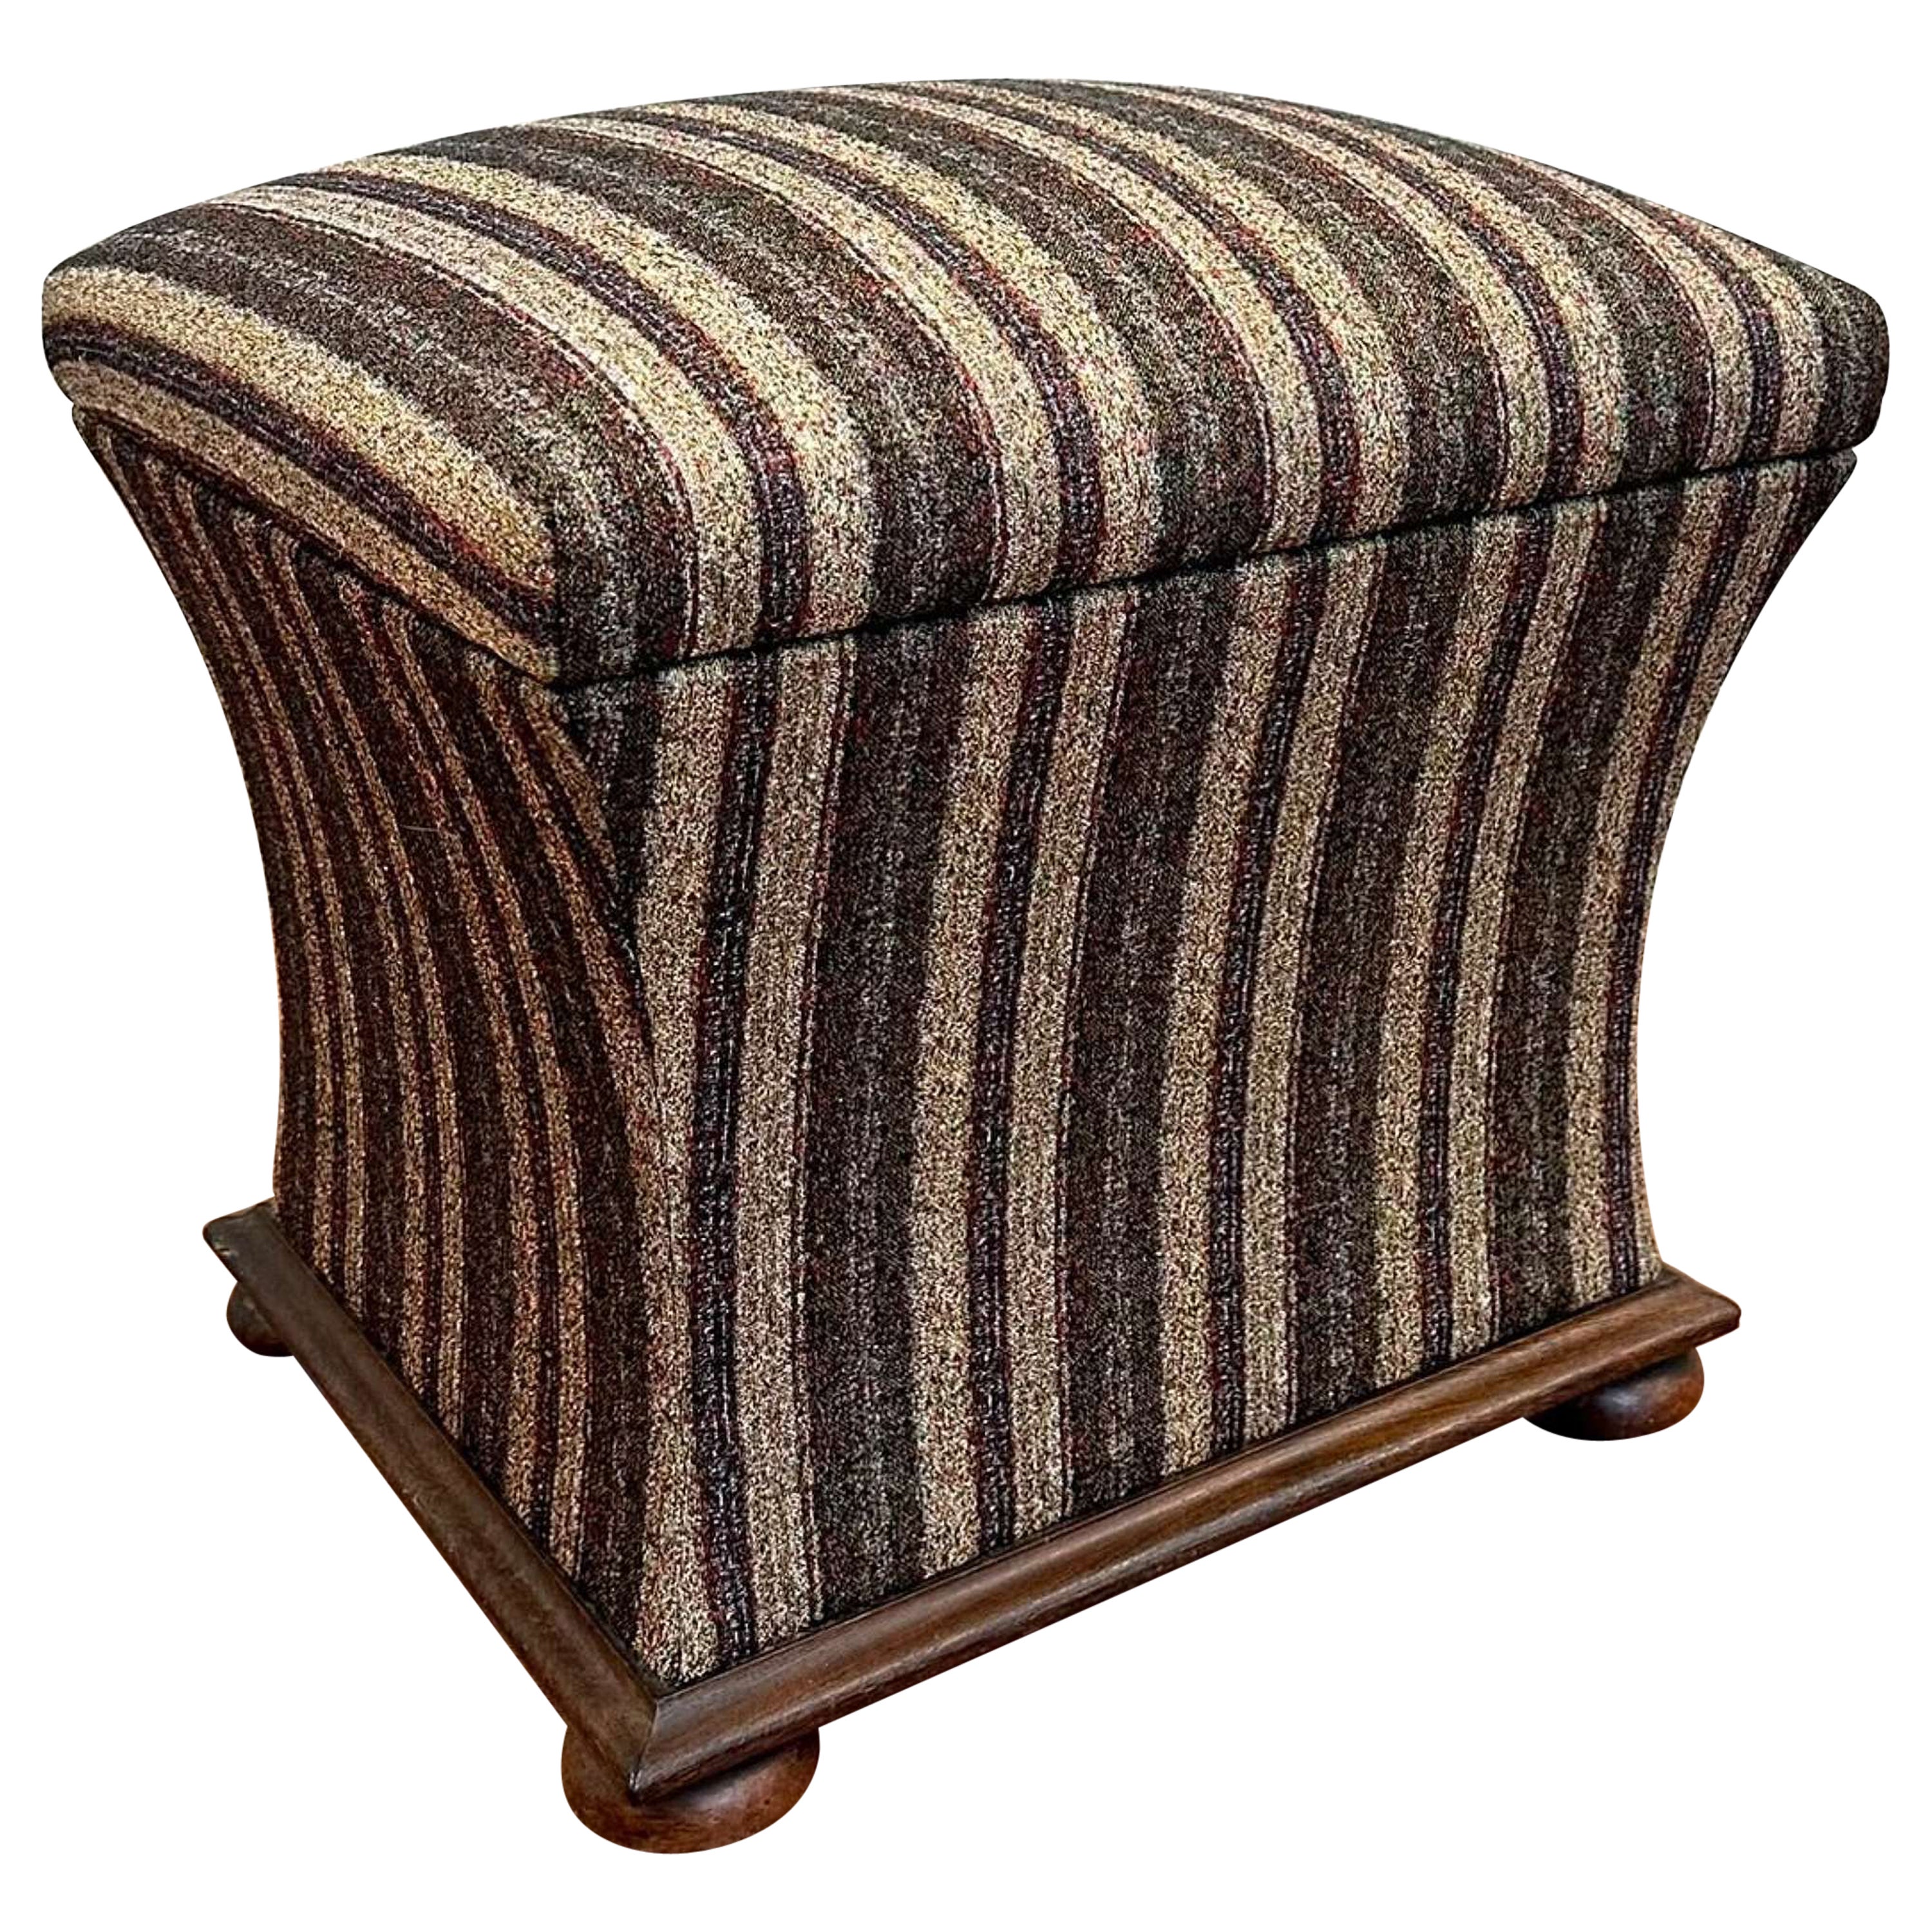 19th Century English Mahogany Upholstered Ottoman Footstool For Sale